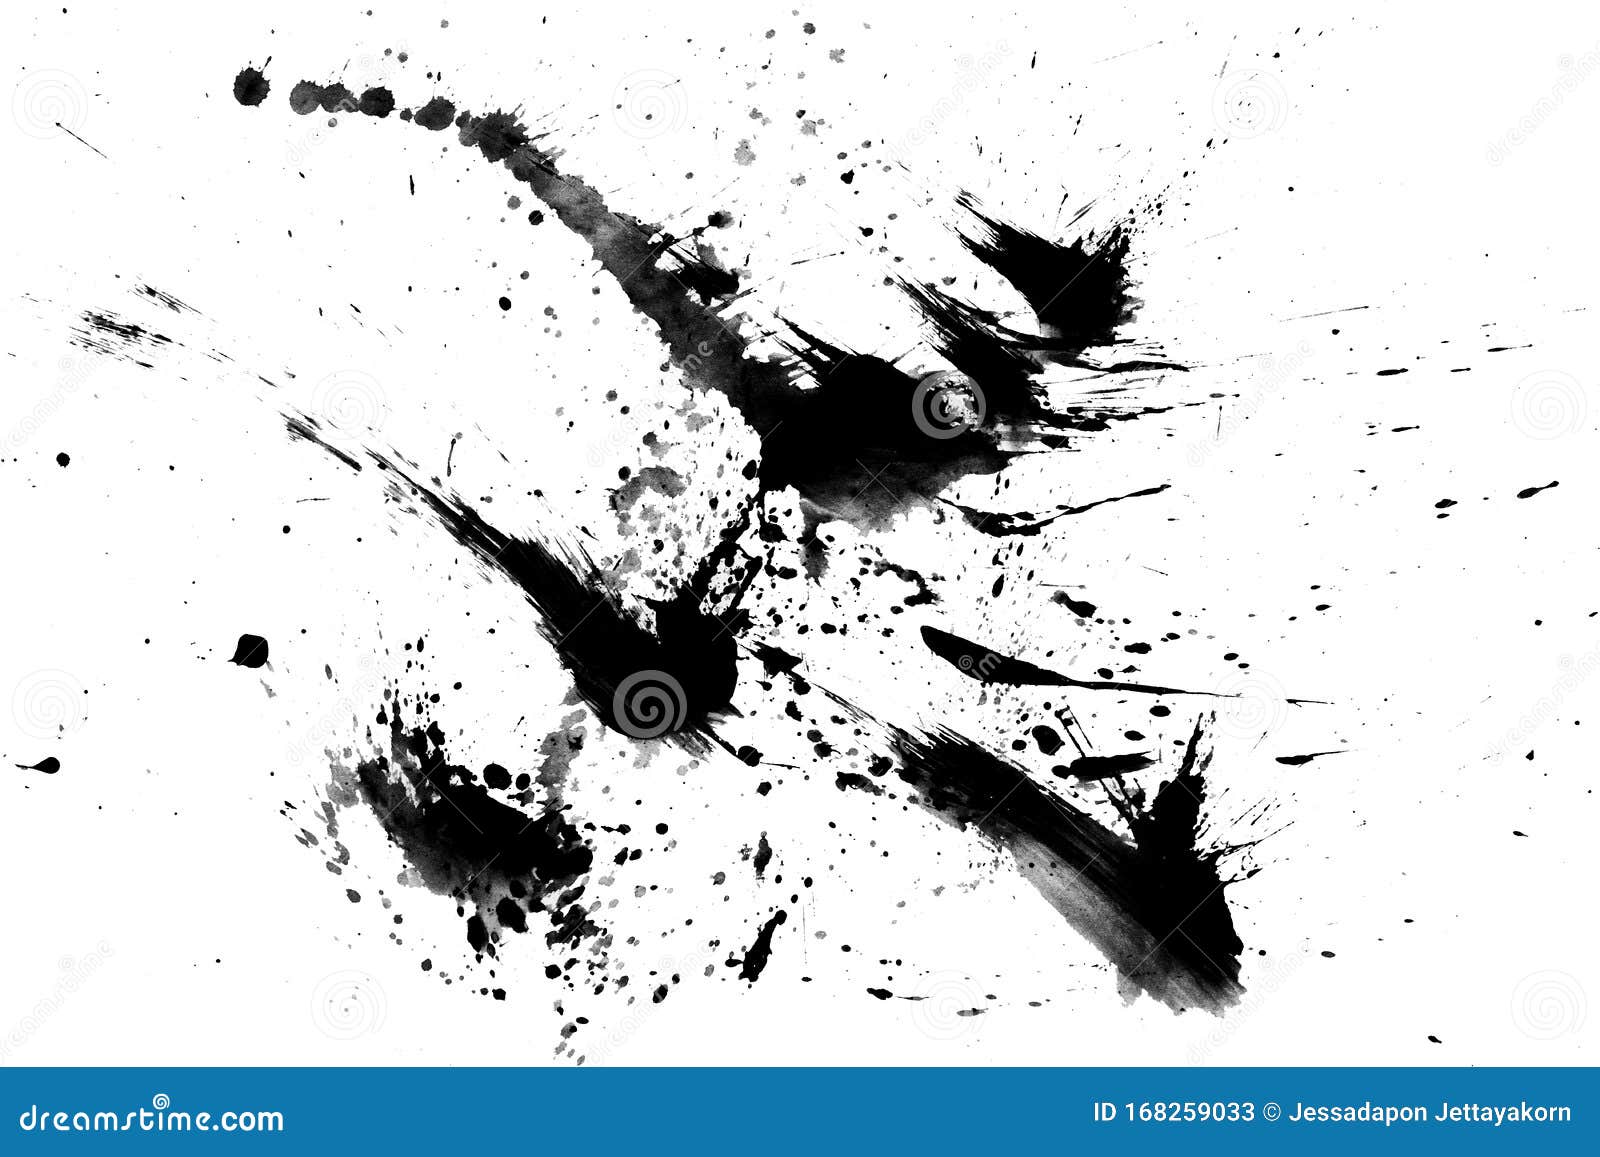 Texture Abstract Japanese Ink On White Paper Background Stock Image Image Of Cover Flyer 168259033